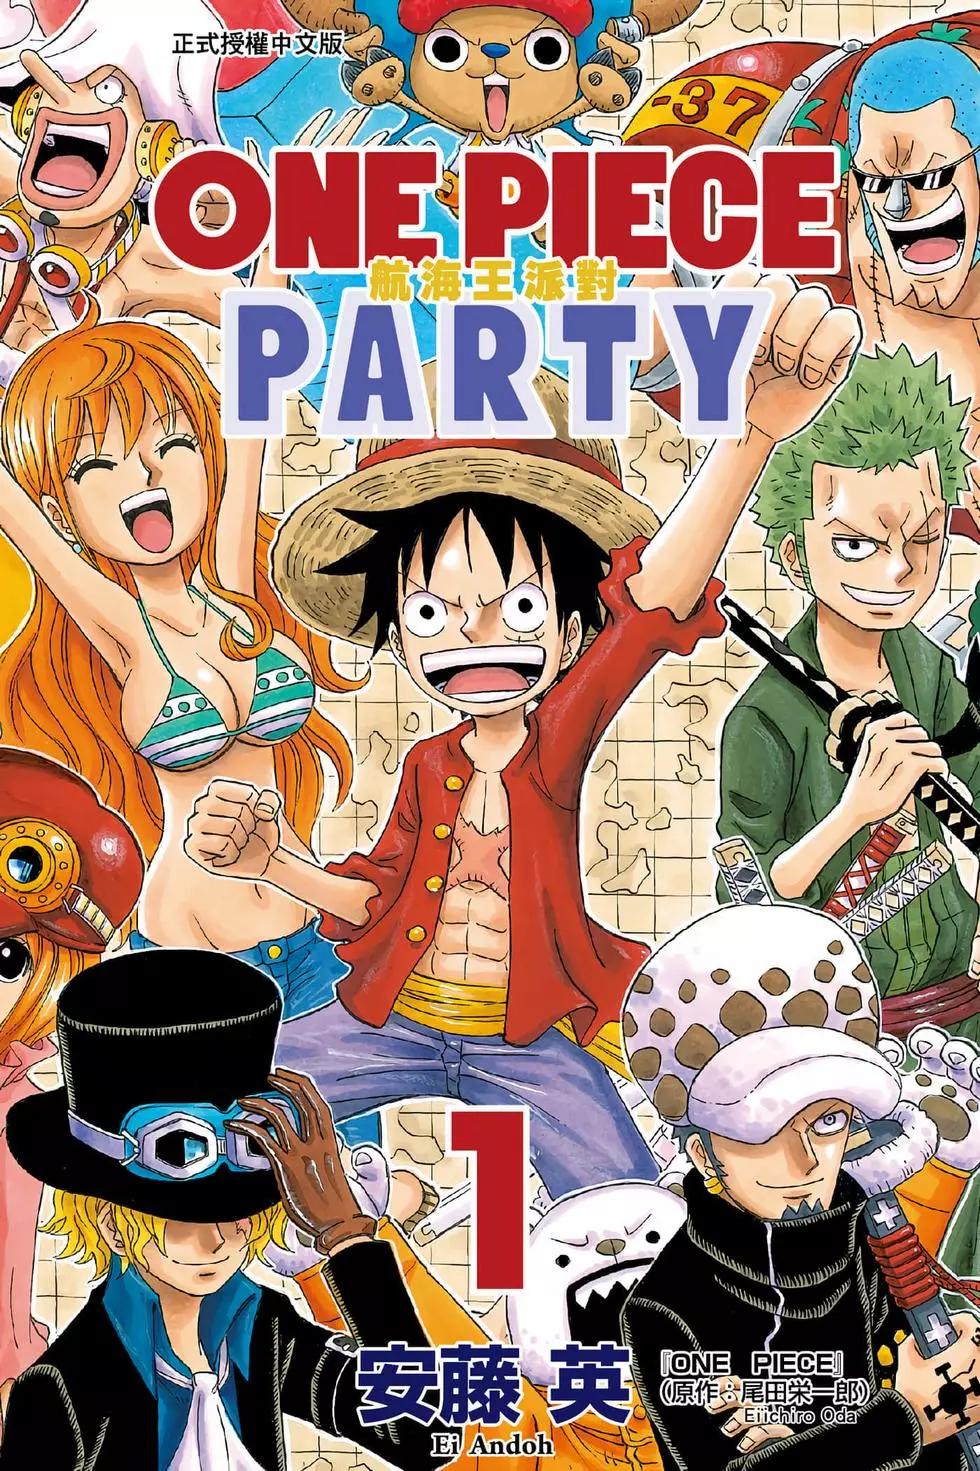 One piece party - 第01卷(1/4) - 1